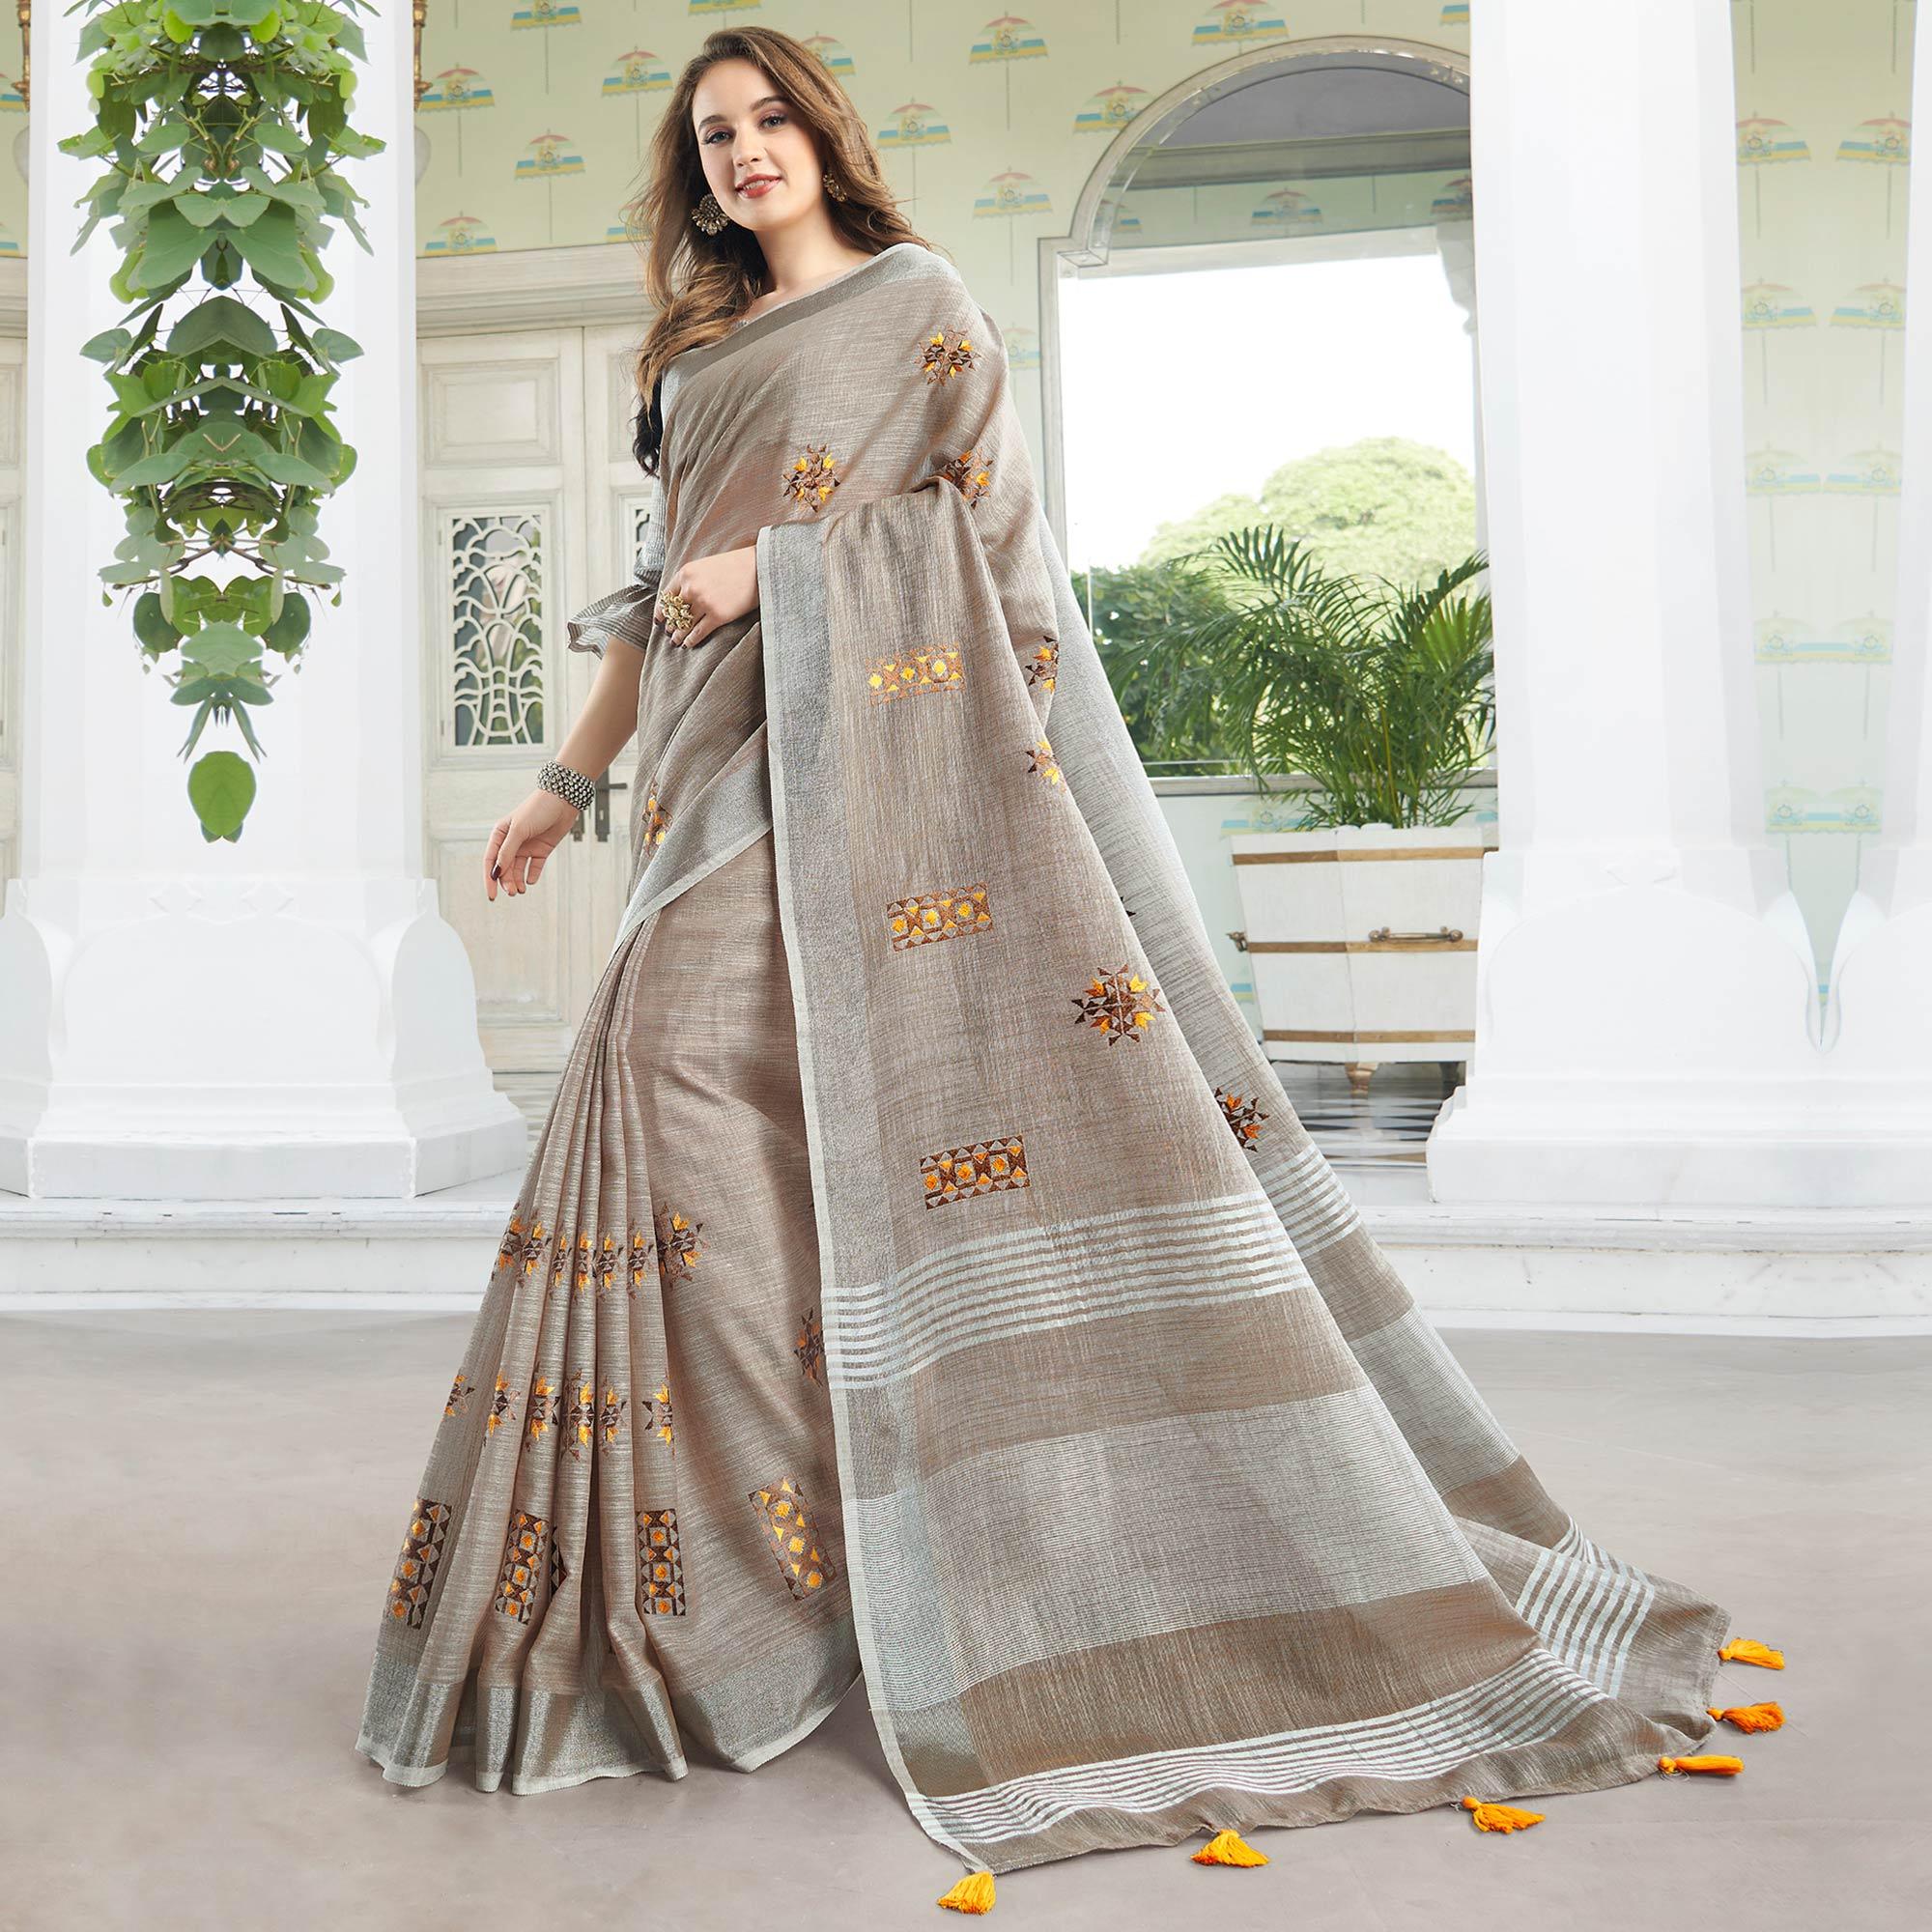 Classy Pastel Brown Colored Casual Wear Floral Embroidered Linen